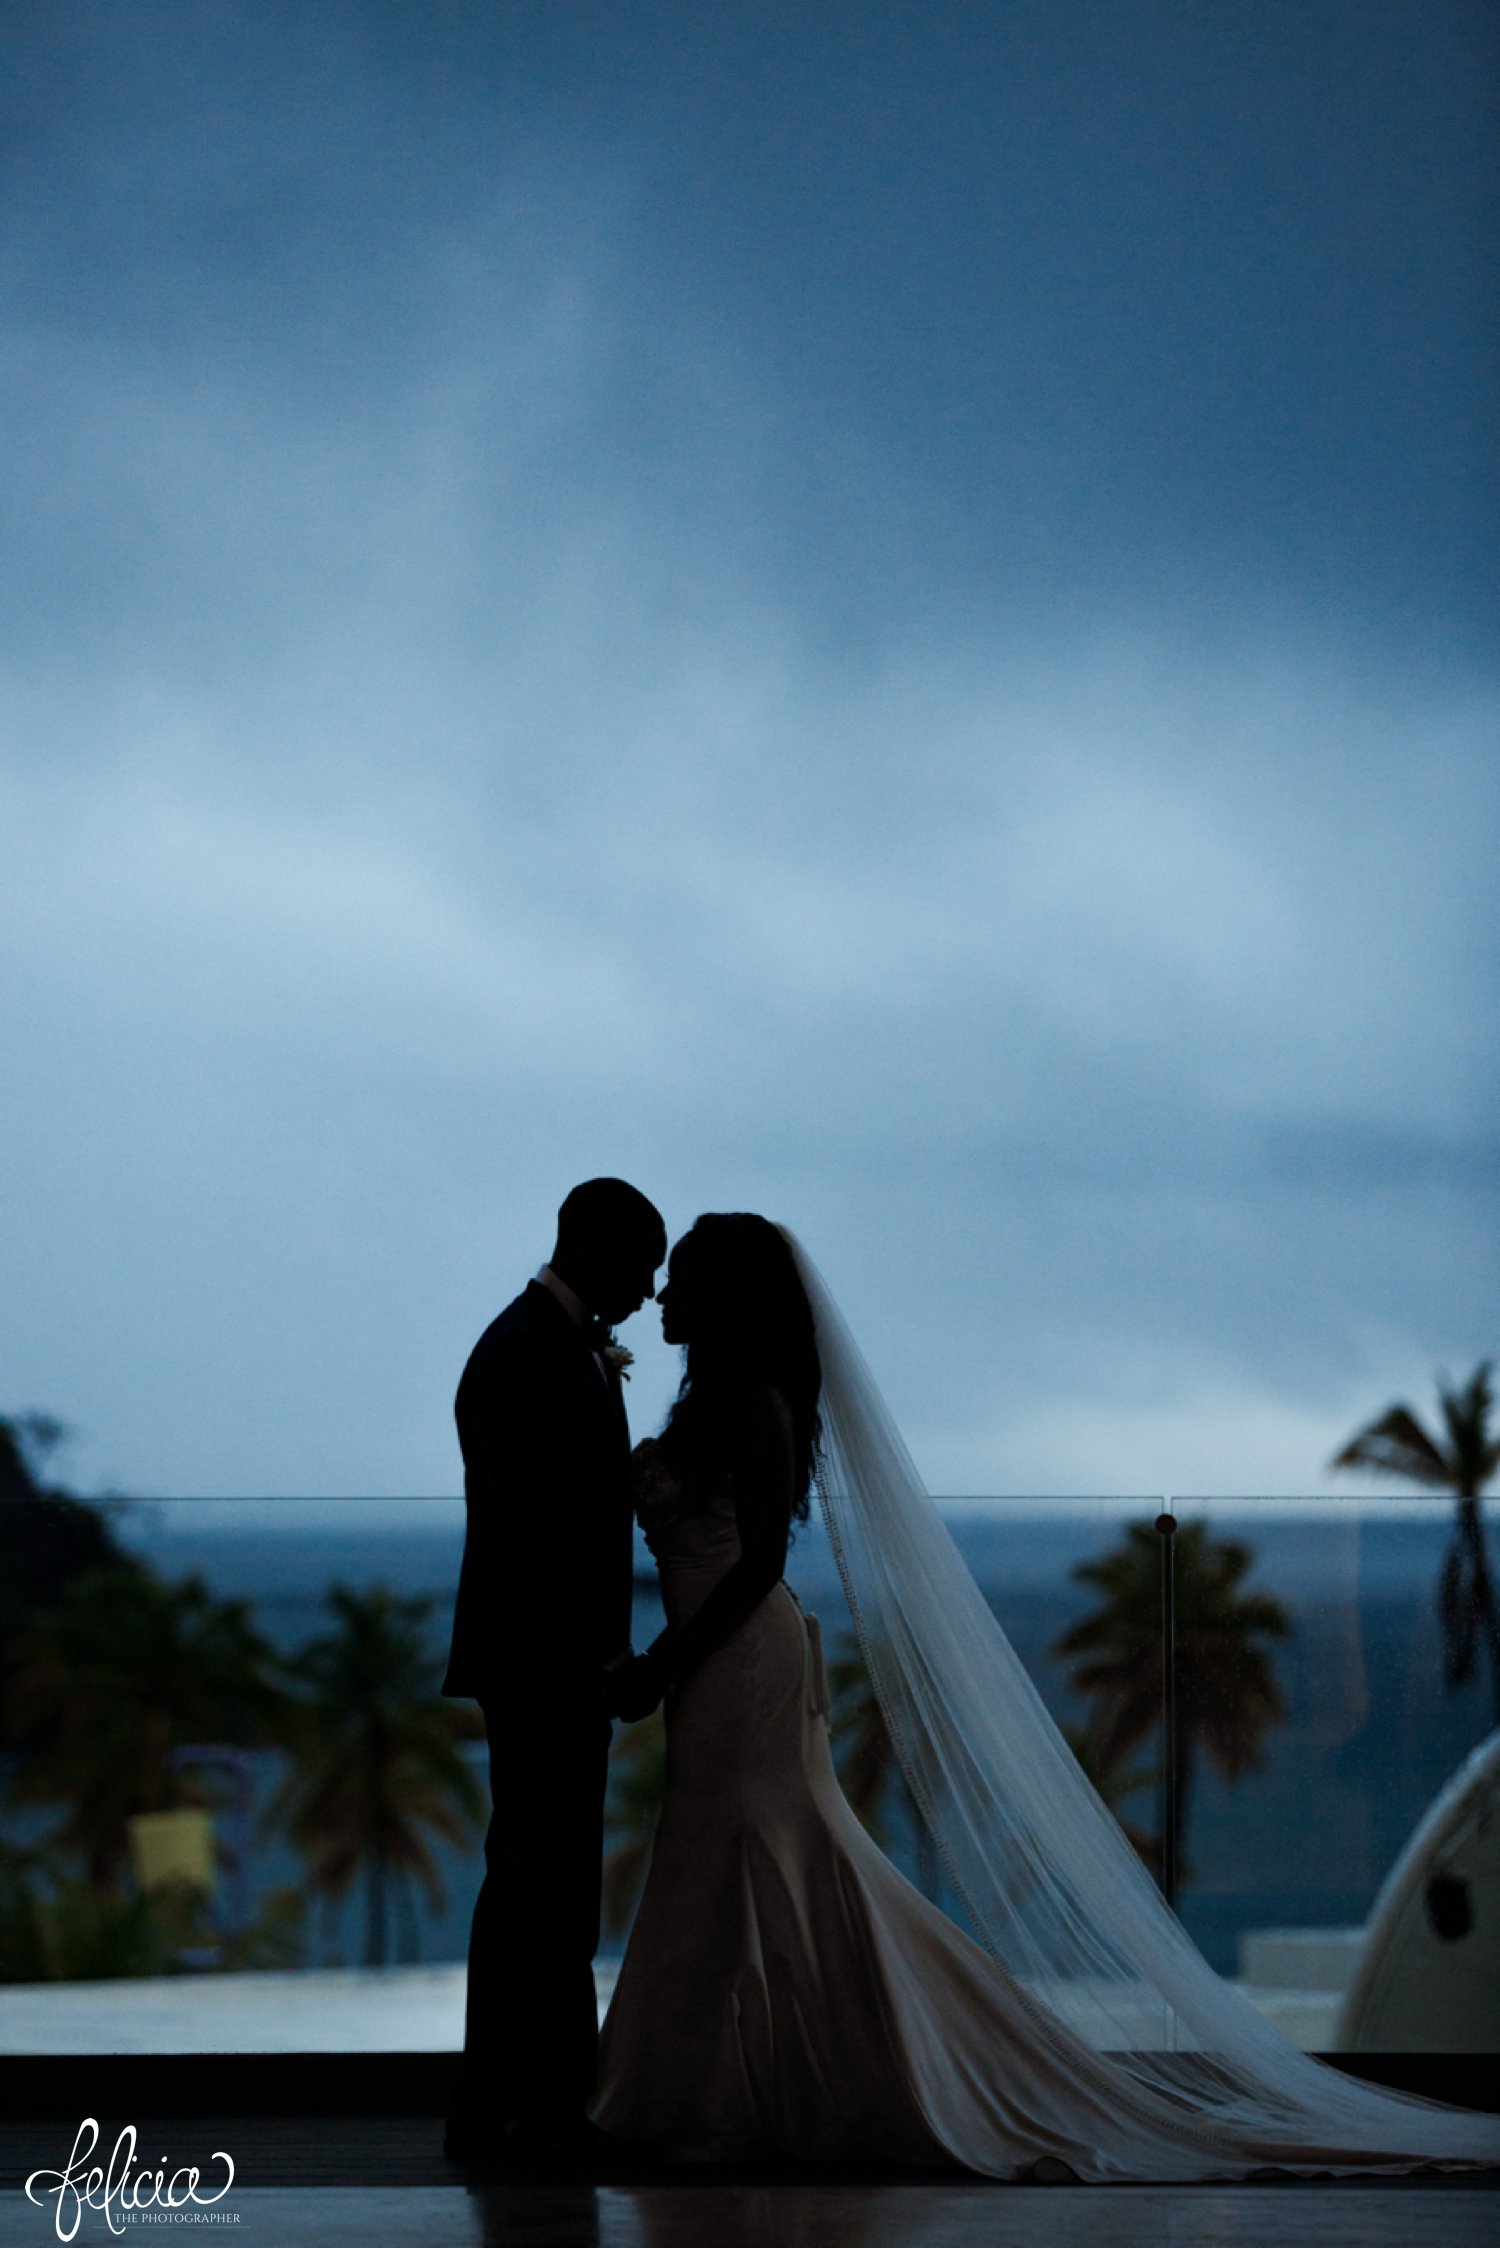   images by feliciathephotographer.com | destination wedding photographer | st lucia | l&s travel | the Royalton | couple portraits | bride and groom | night on the beach | thunder storm | fire lighting | romantic | white gown | kleinfeld | navy suit | 